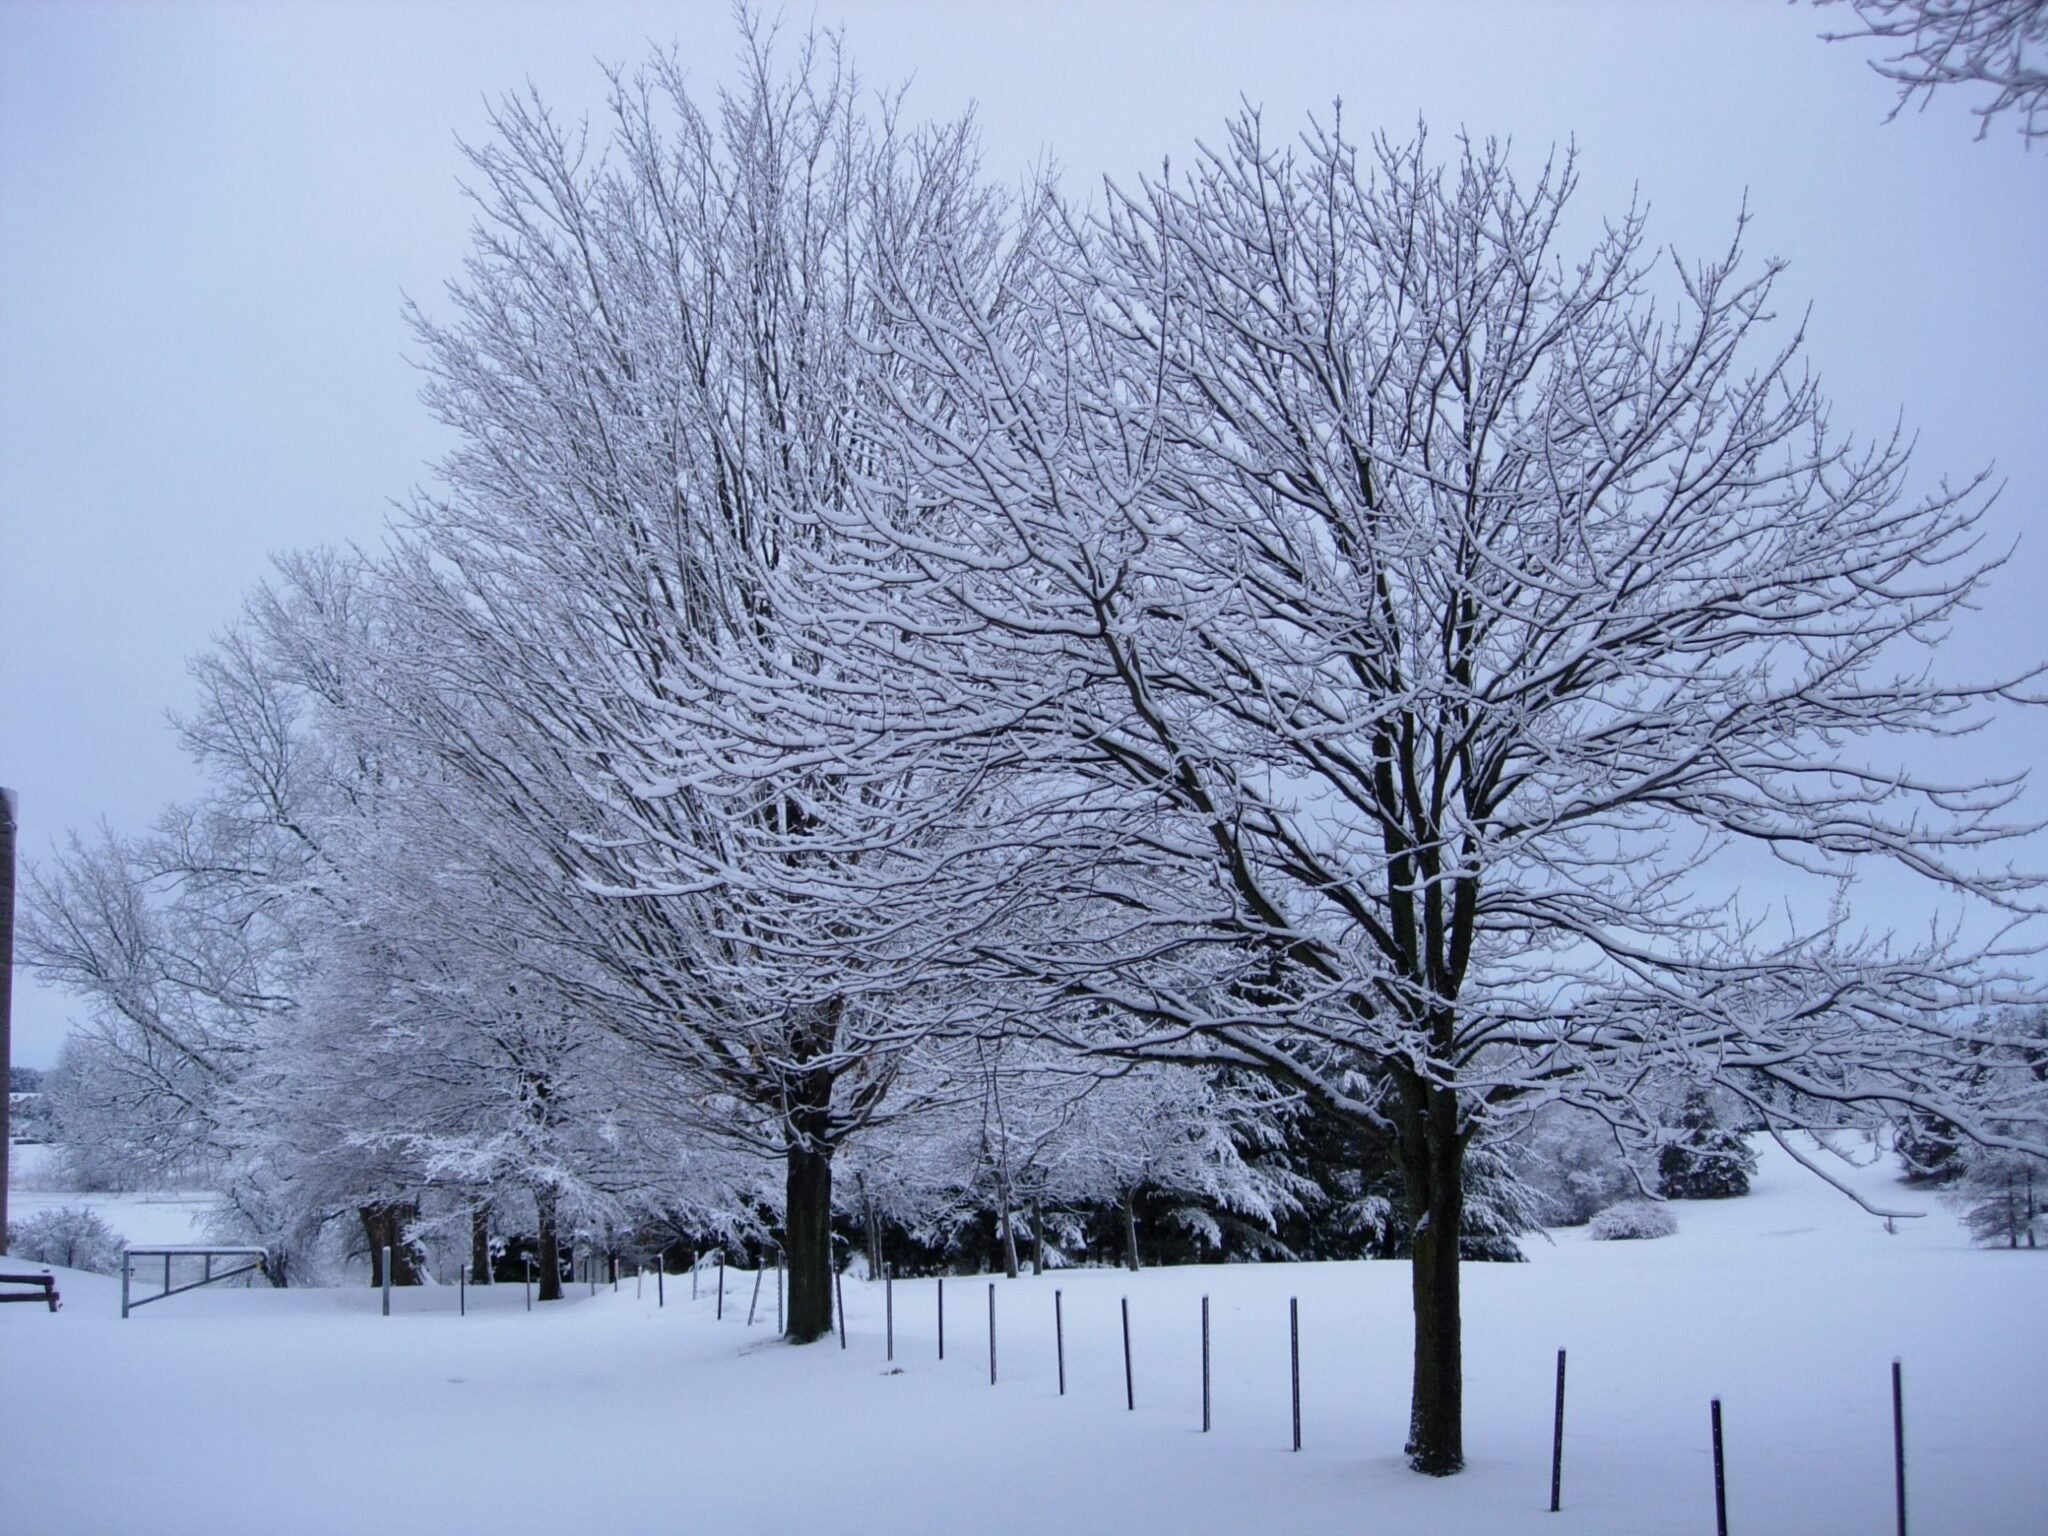 Trees covered in snow in winter